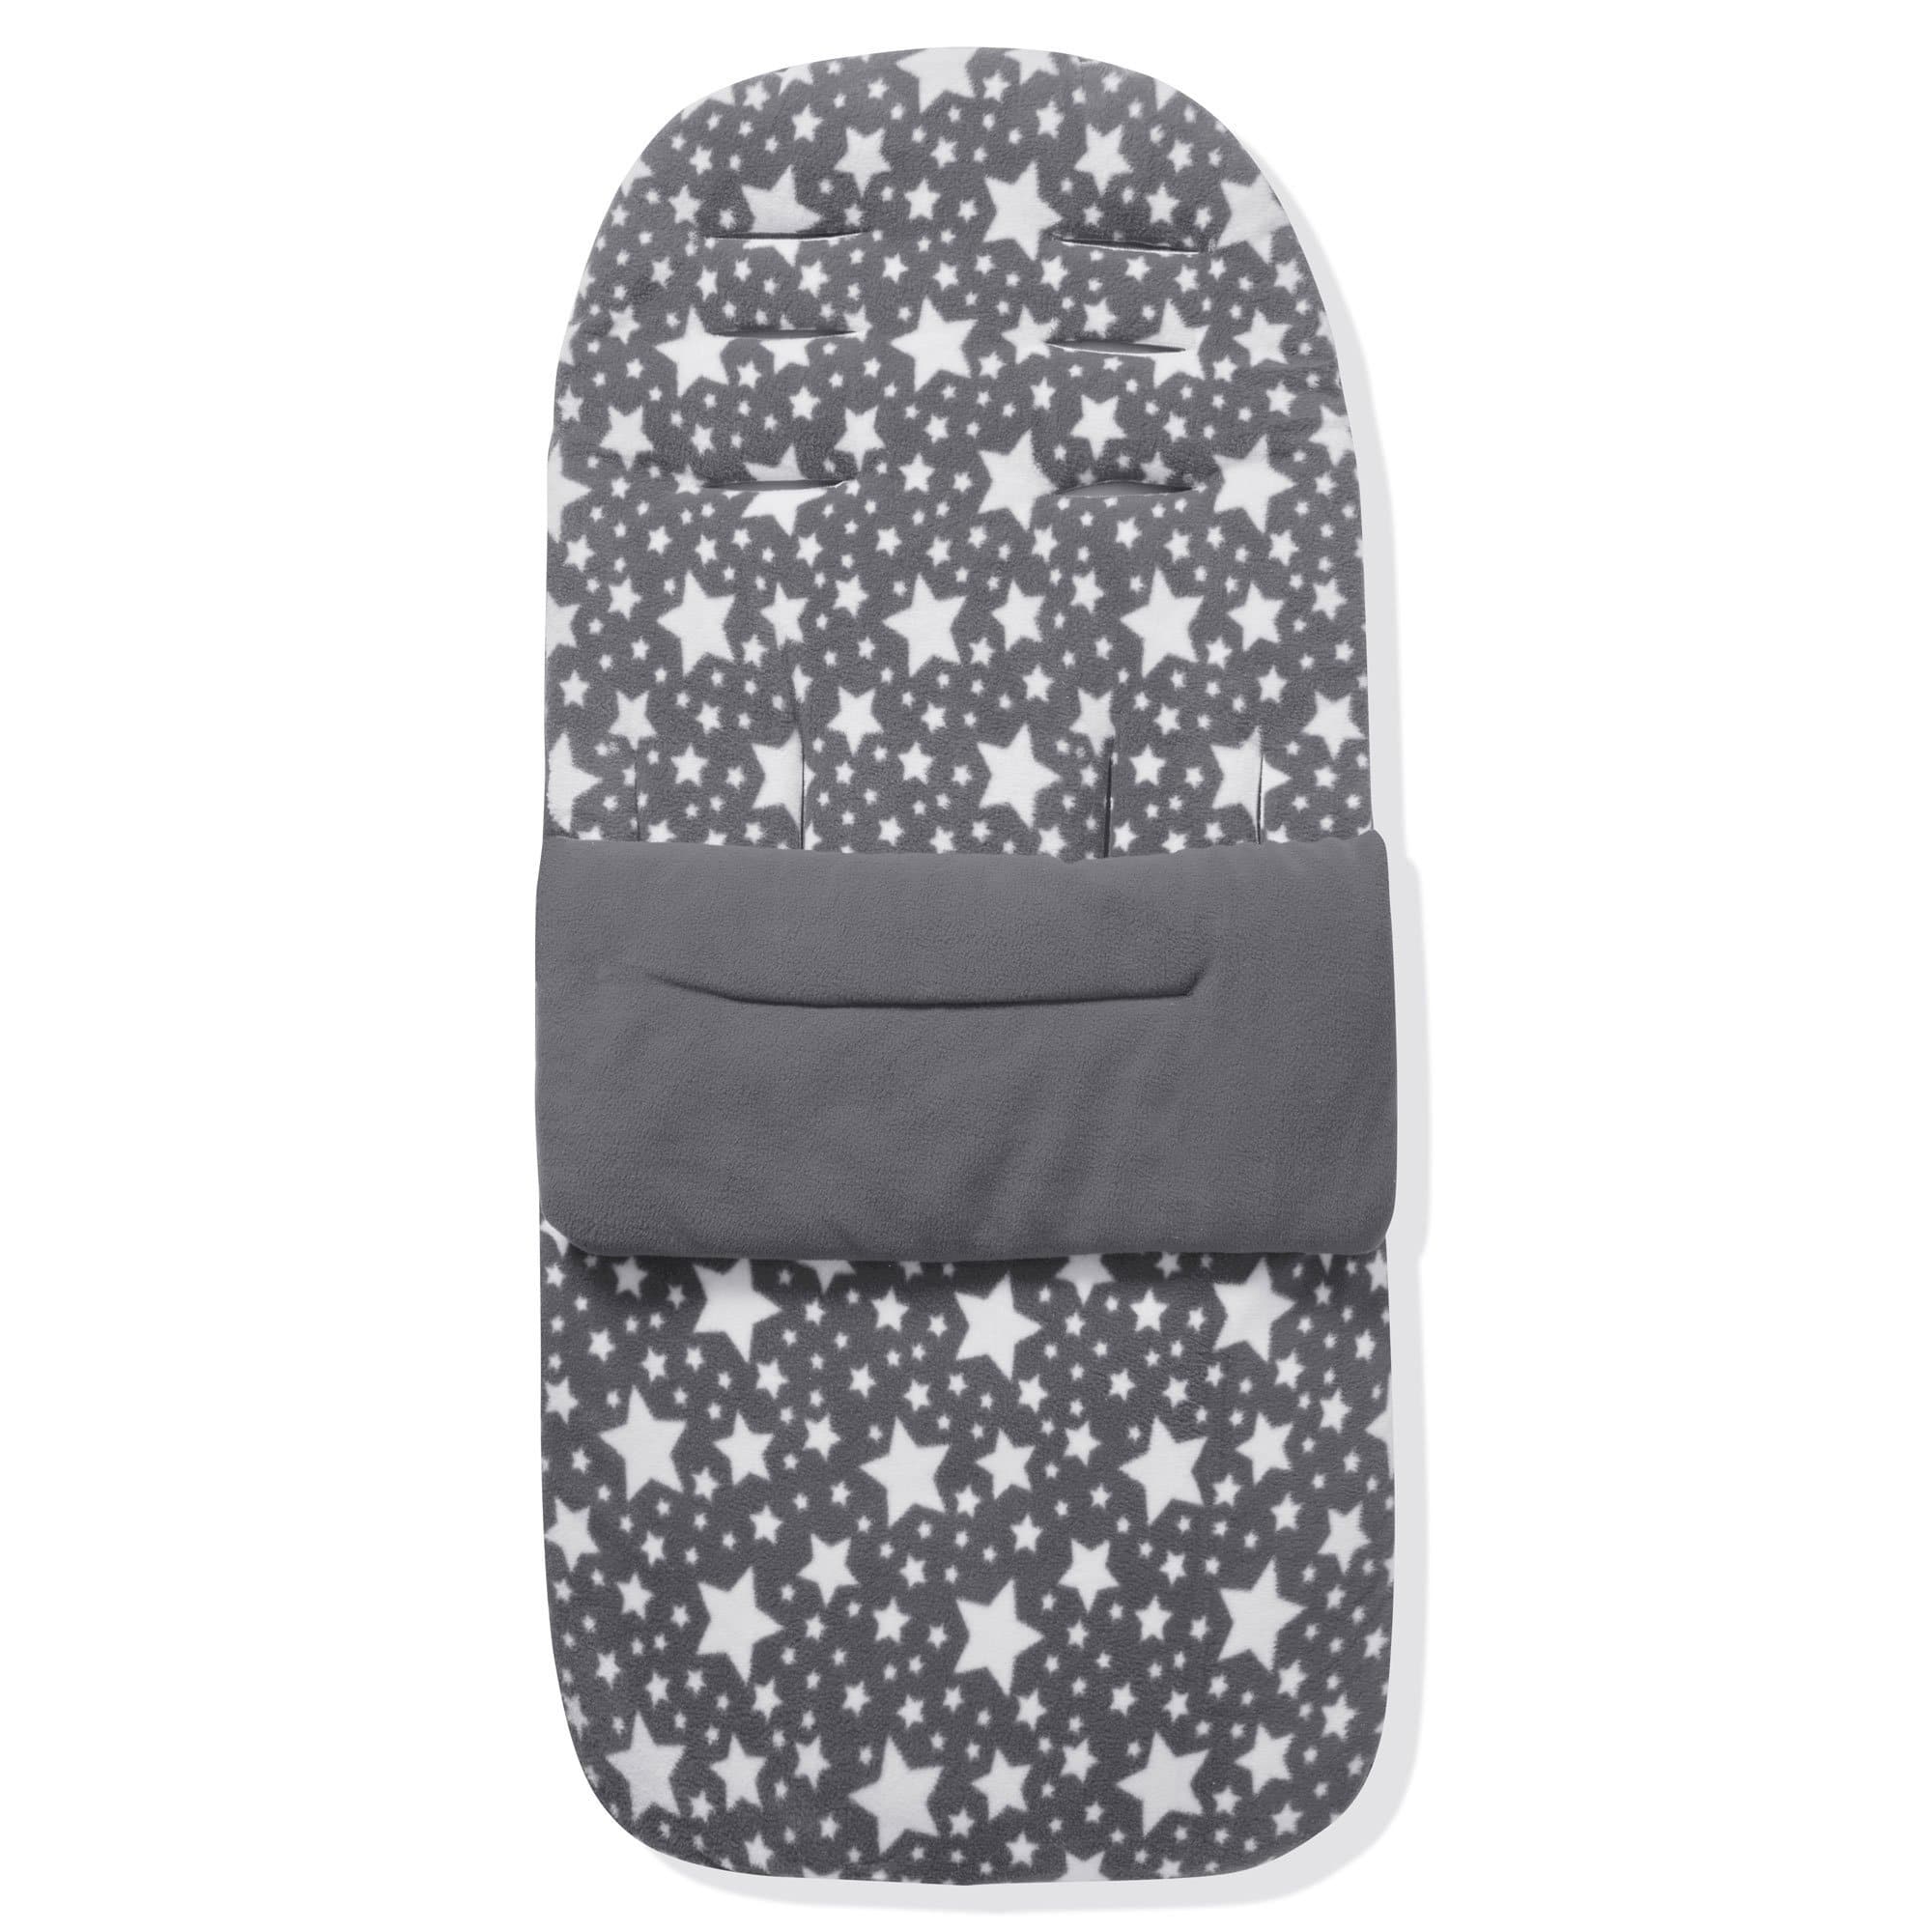 Fleece Footmuff / Cosy Toes Compatible with Obaby - Grey Star / Fits All Models | For Your Little One